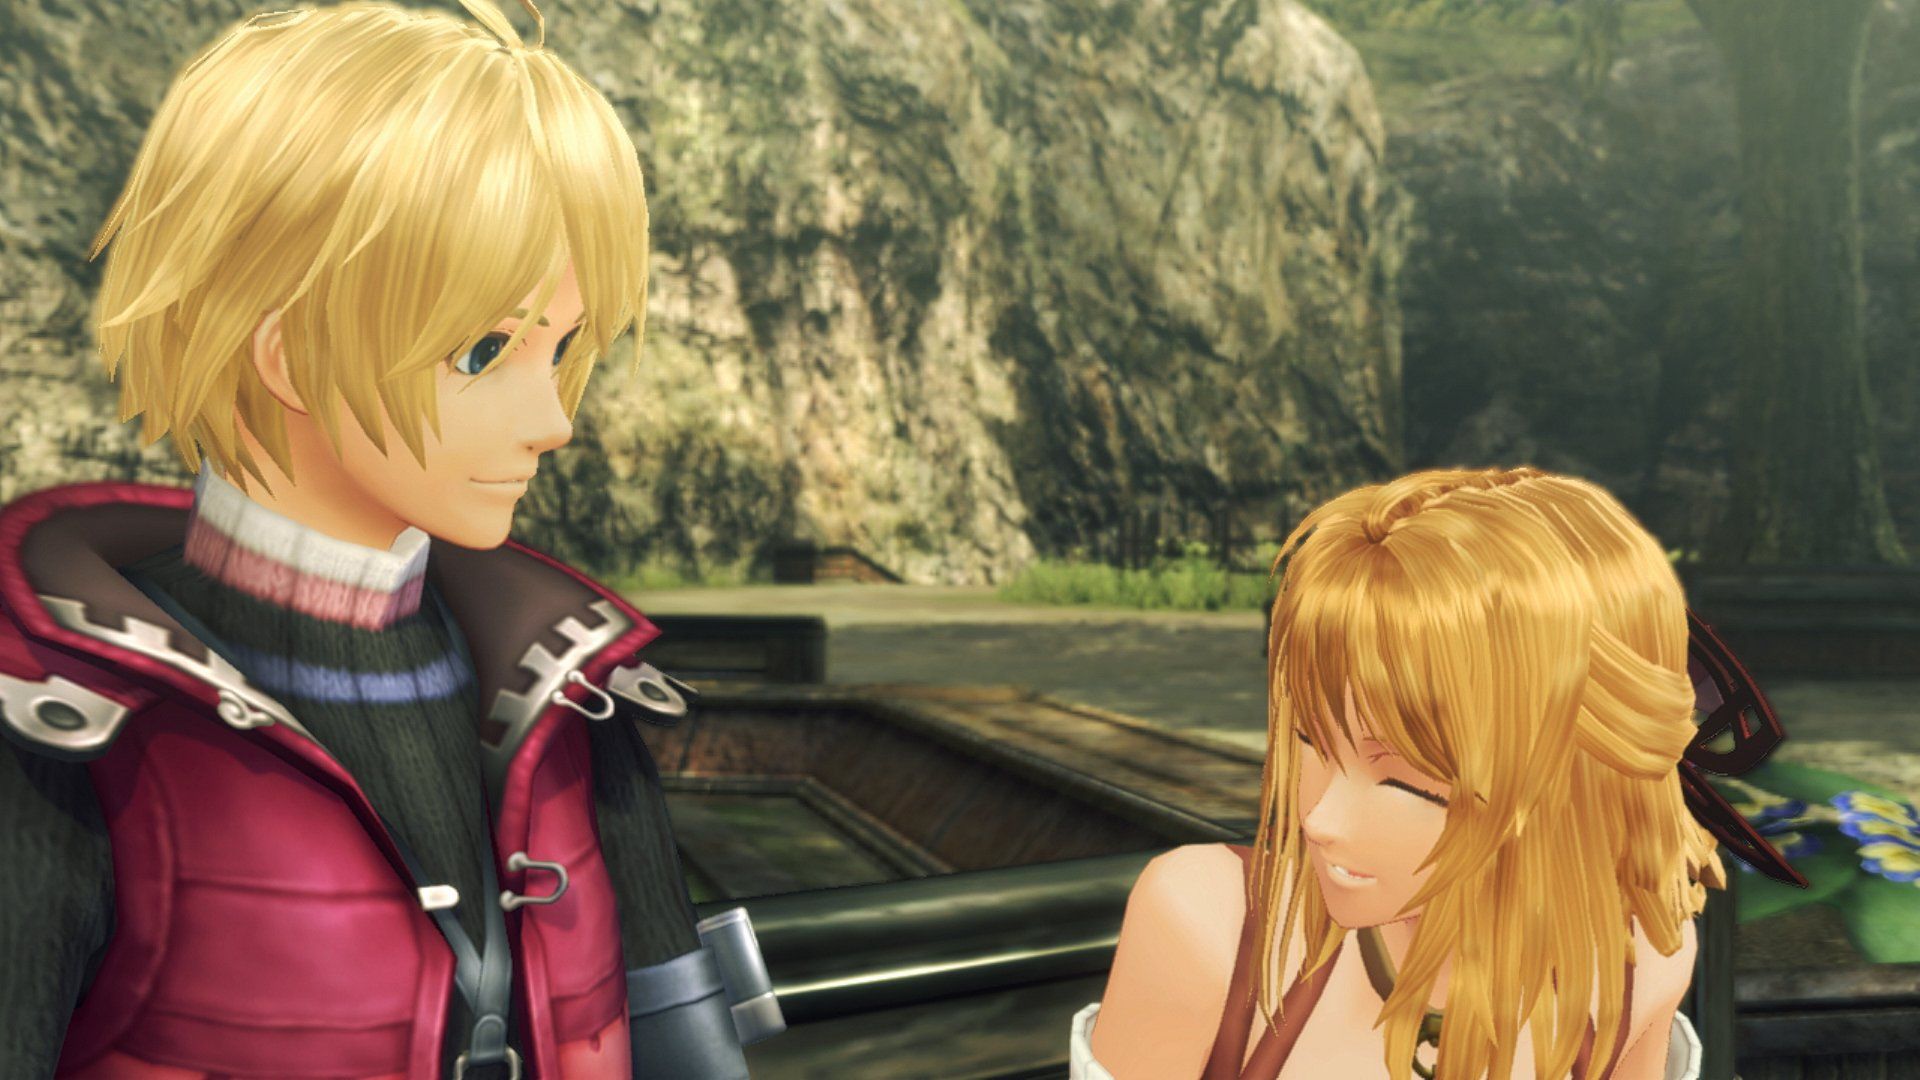 Xenoblade Chronicles: Definitive Edition screenshots and art